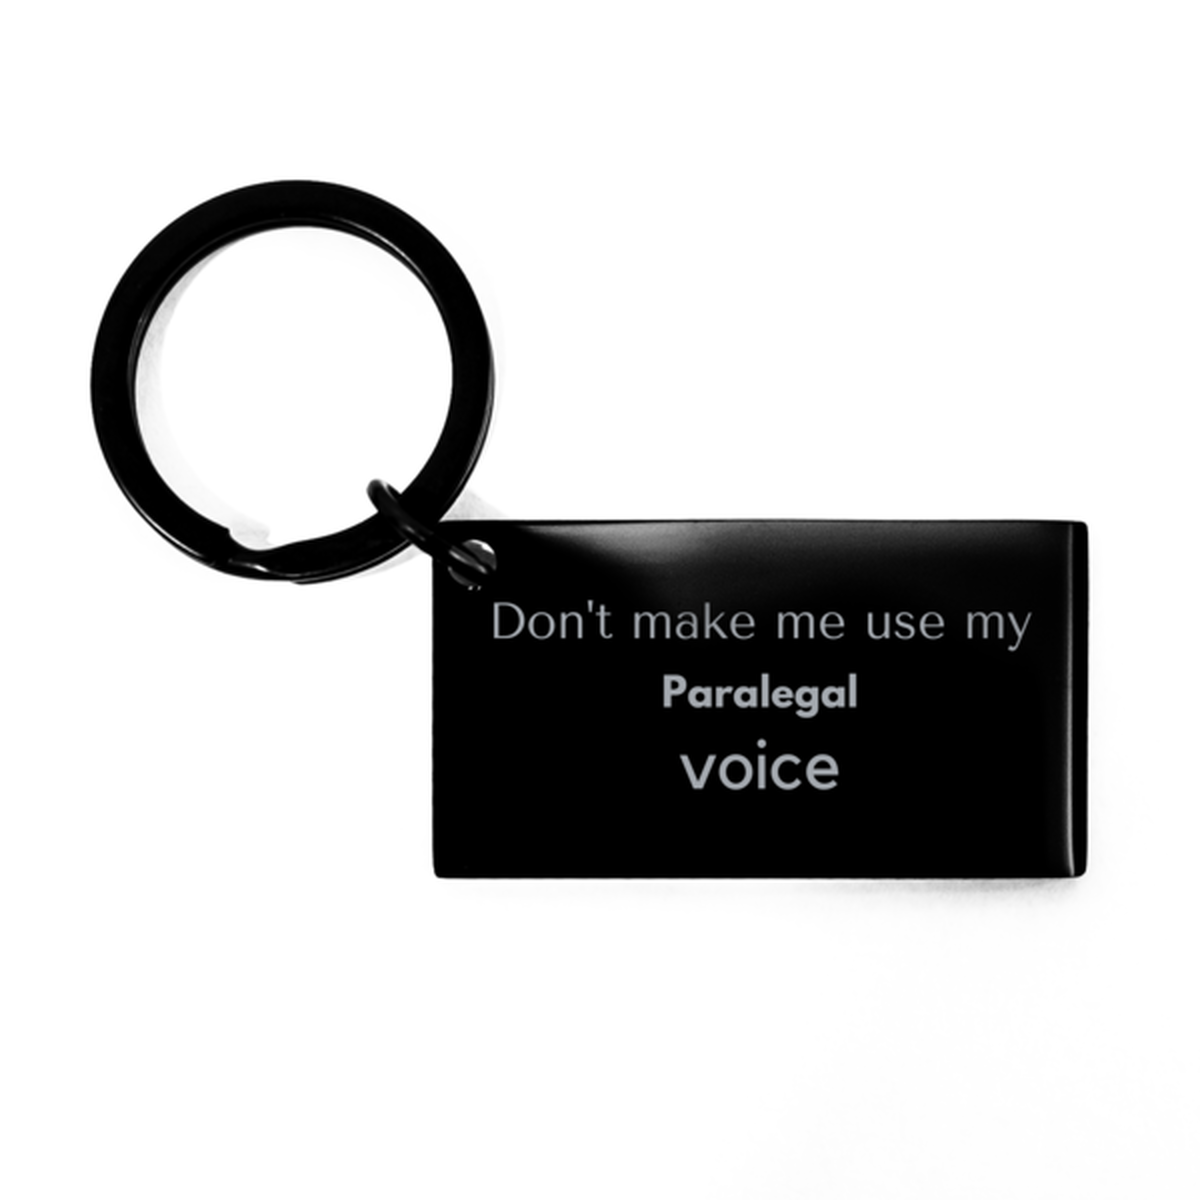 Don't make me use my Paralegal voice, Sarcasm Paralegal Gifts, Christmas Paralegal Keychain Birthday Unique Gifts For Paralegal Coworkers, Men, Women, Colleague, Friends